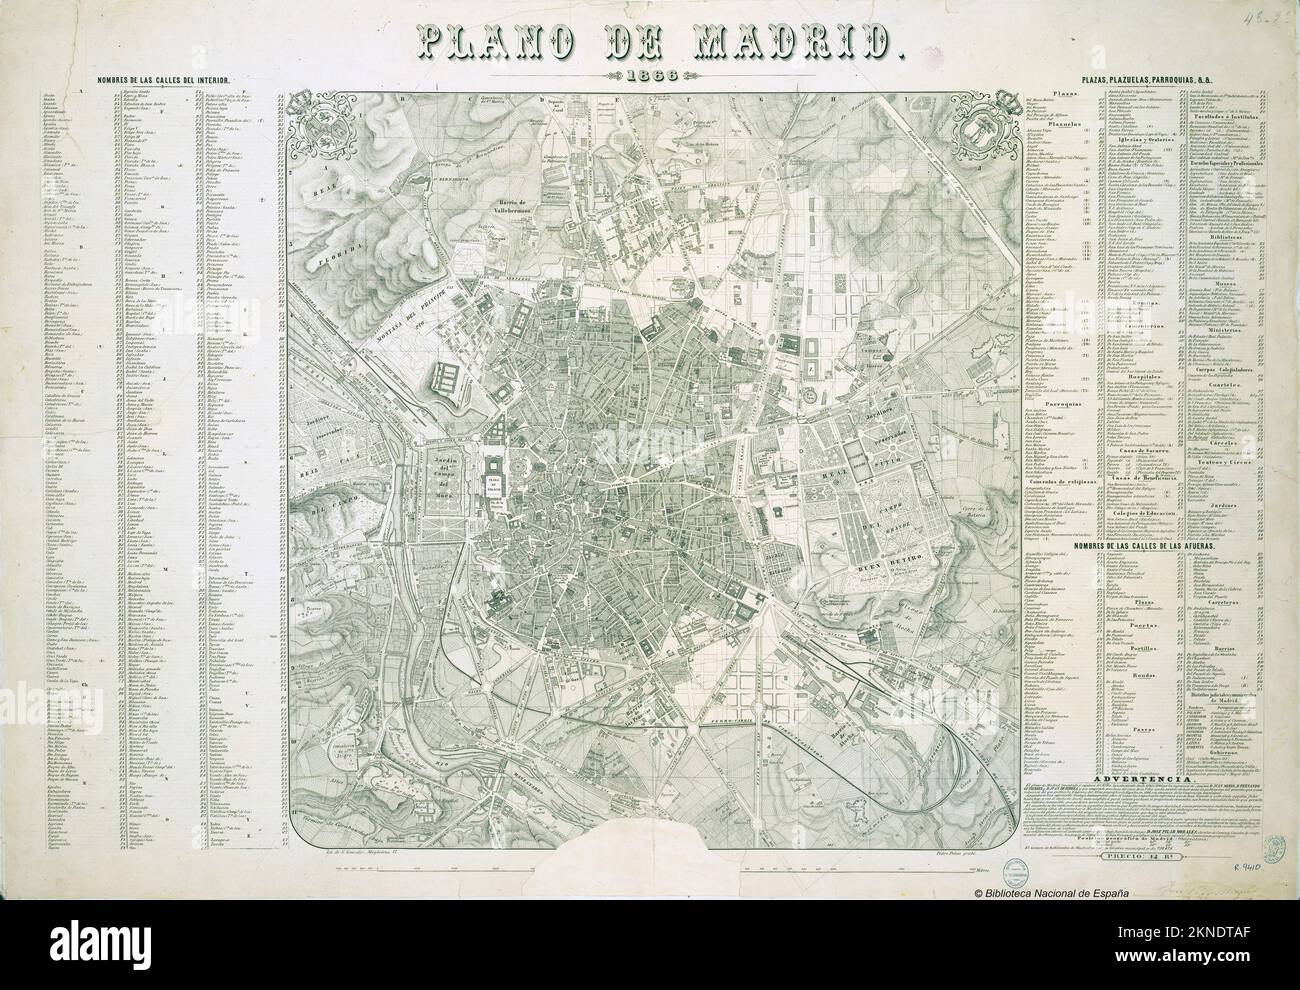 Vintage city plan of Madrid and area around it from 17-19th century. Maps are beautifully hand illustrated and engraved showing it at the time. Stock Photo